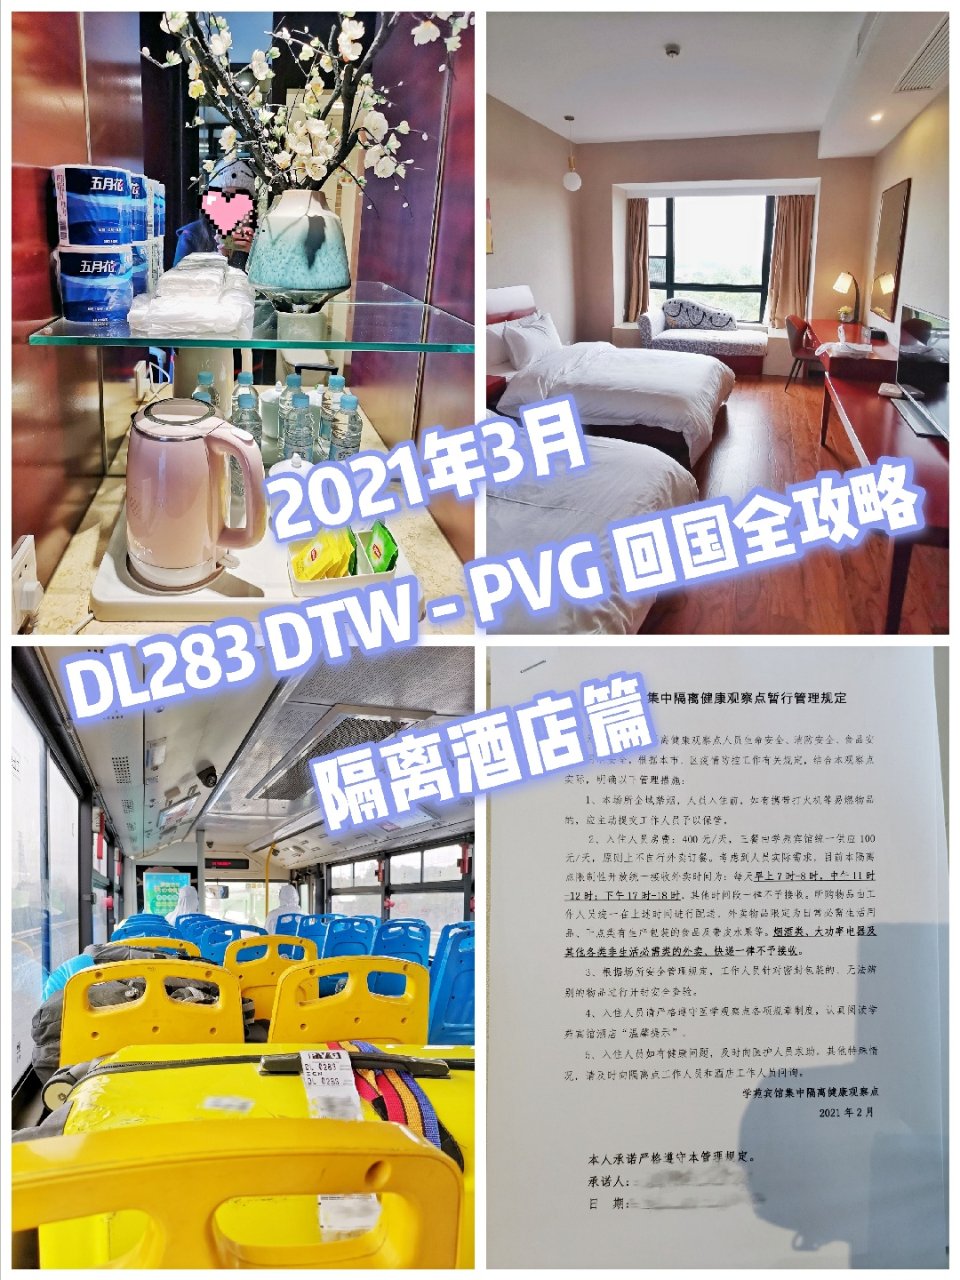 DL283 DTW - PVG 最新政策...